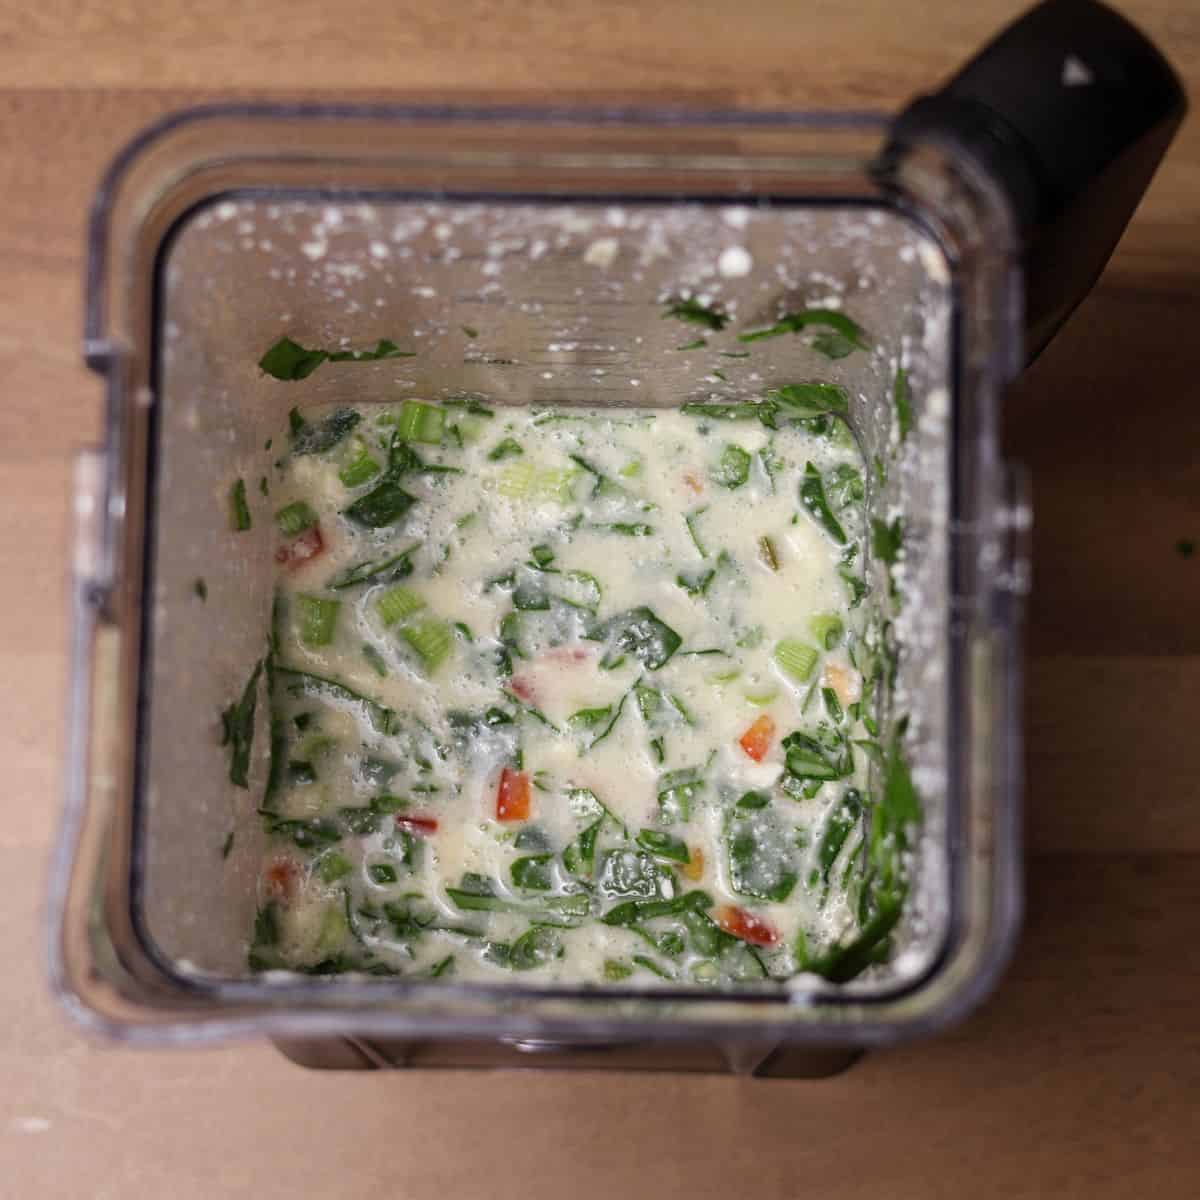 Looking down into a blender where the egg mixture is combined with finely chopped spinach, red bell peppers, and green onions, ready for the final mix.